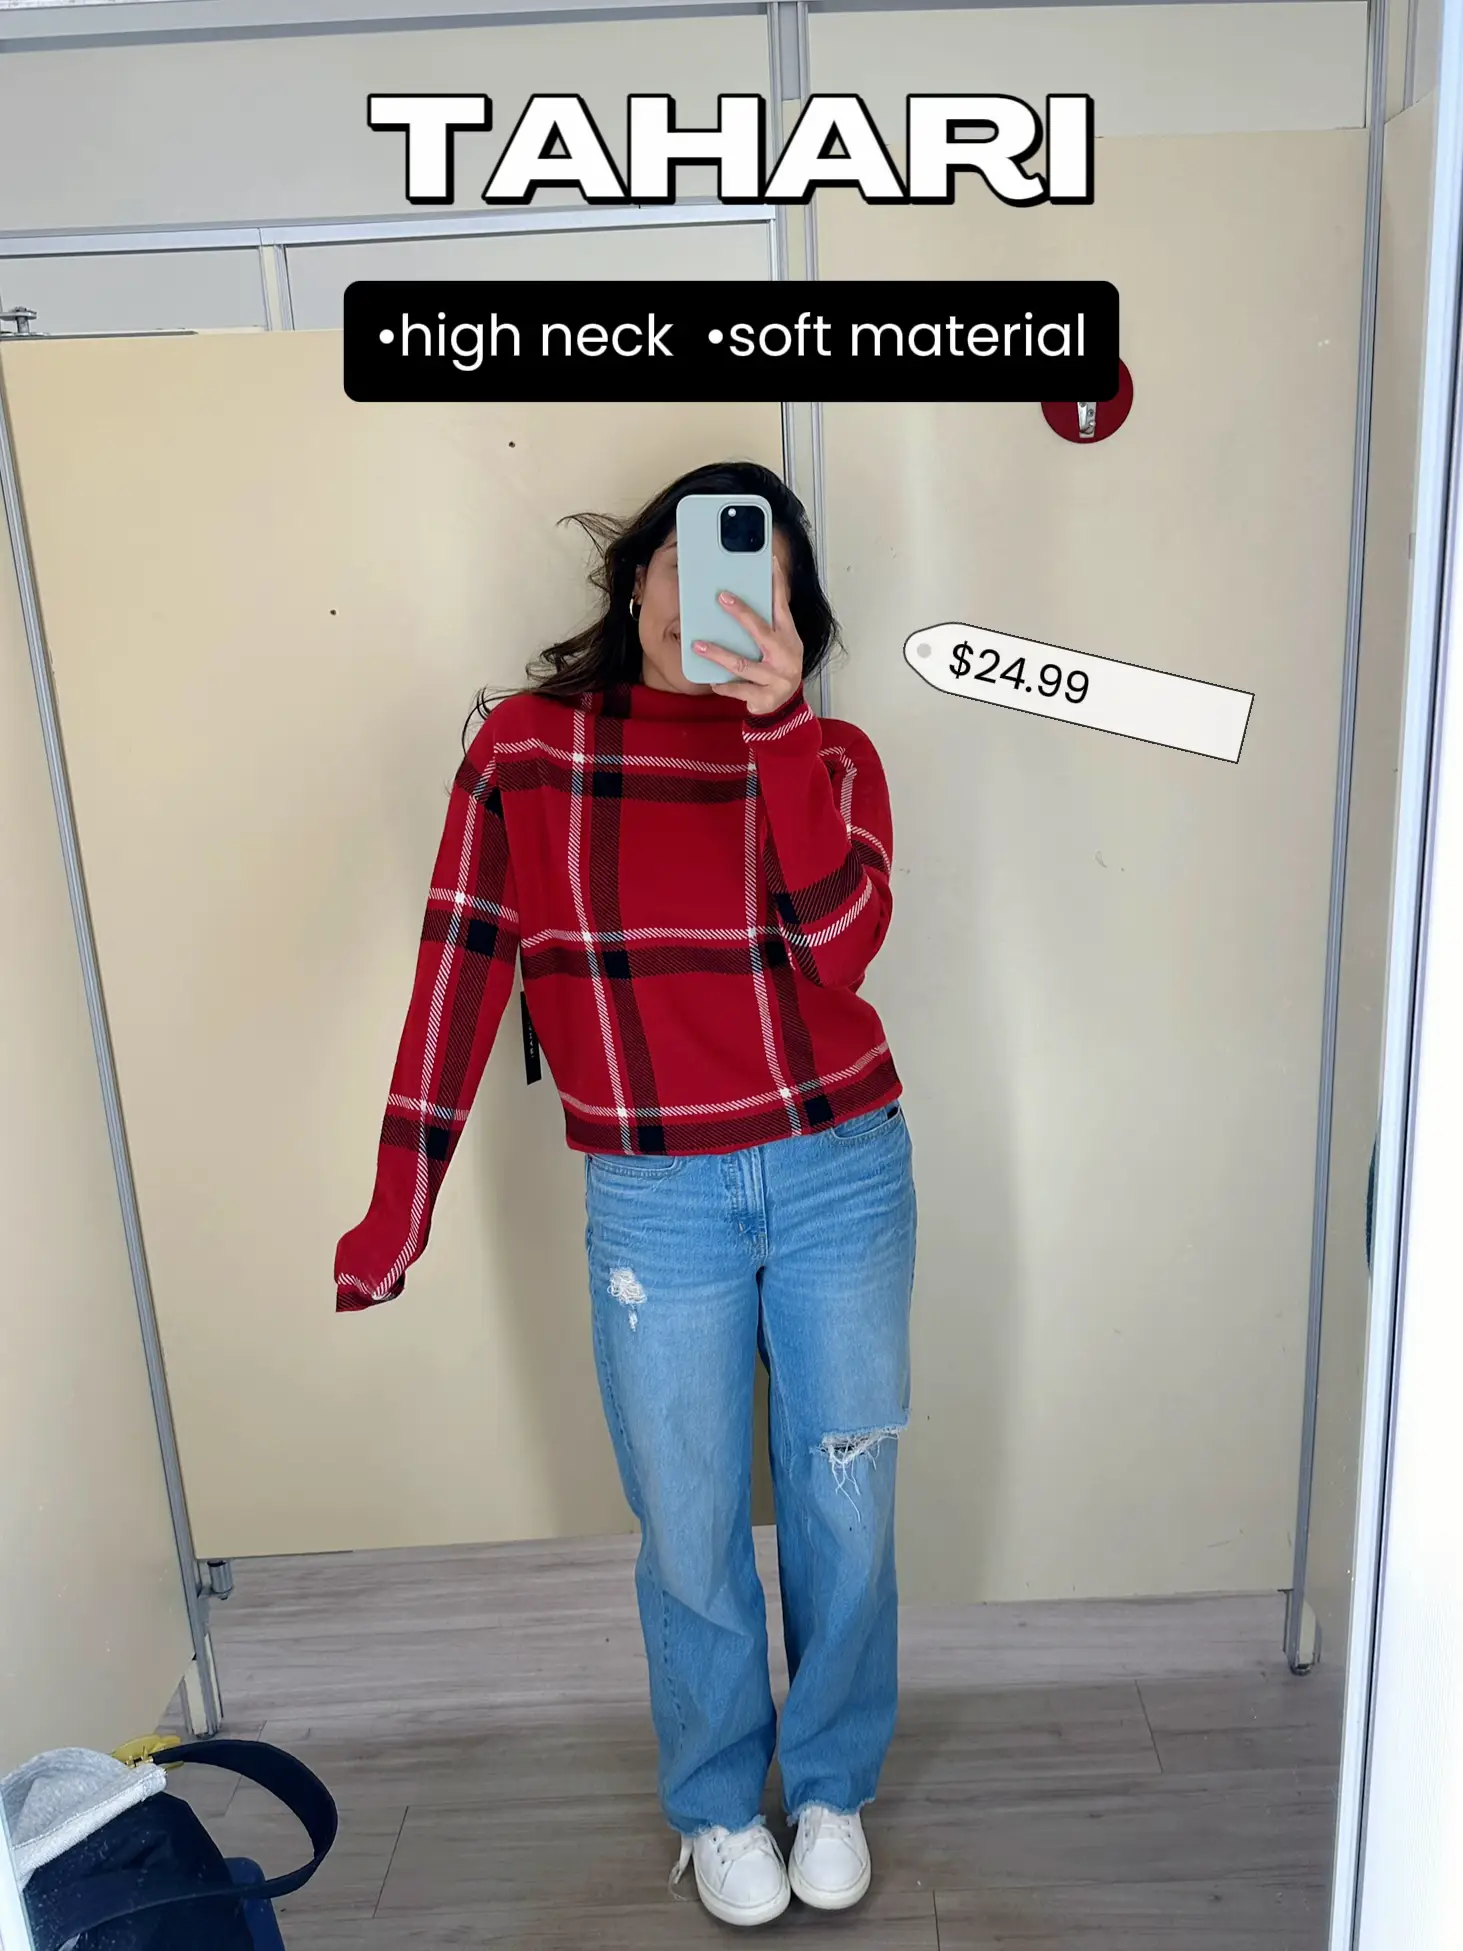  A woman in a red and white checkered shirt is taking a selfie in a mirror.